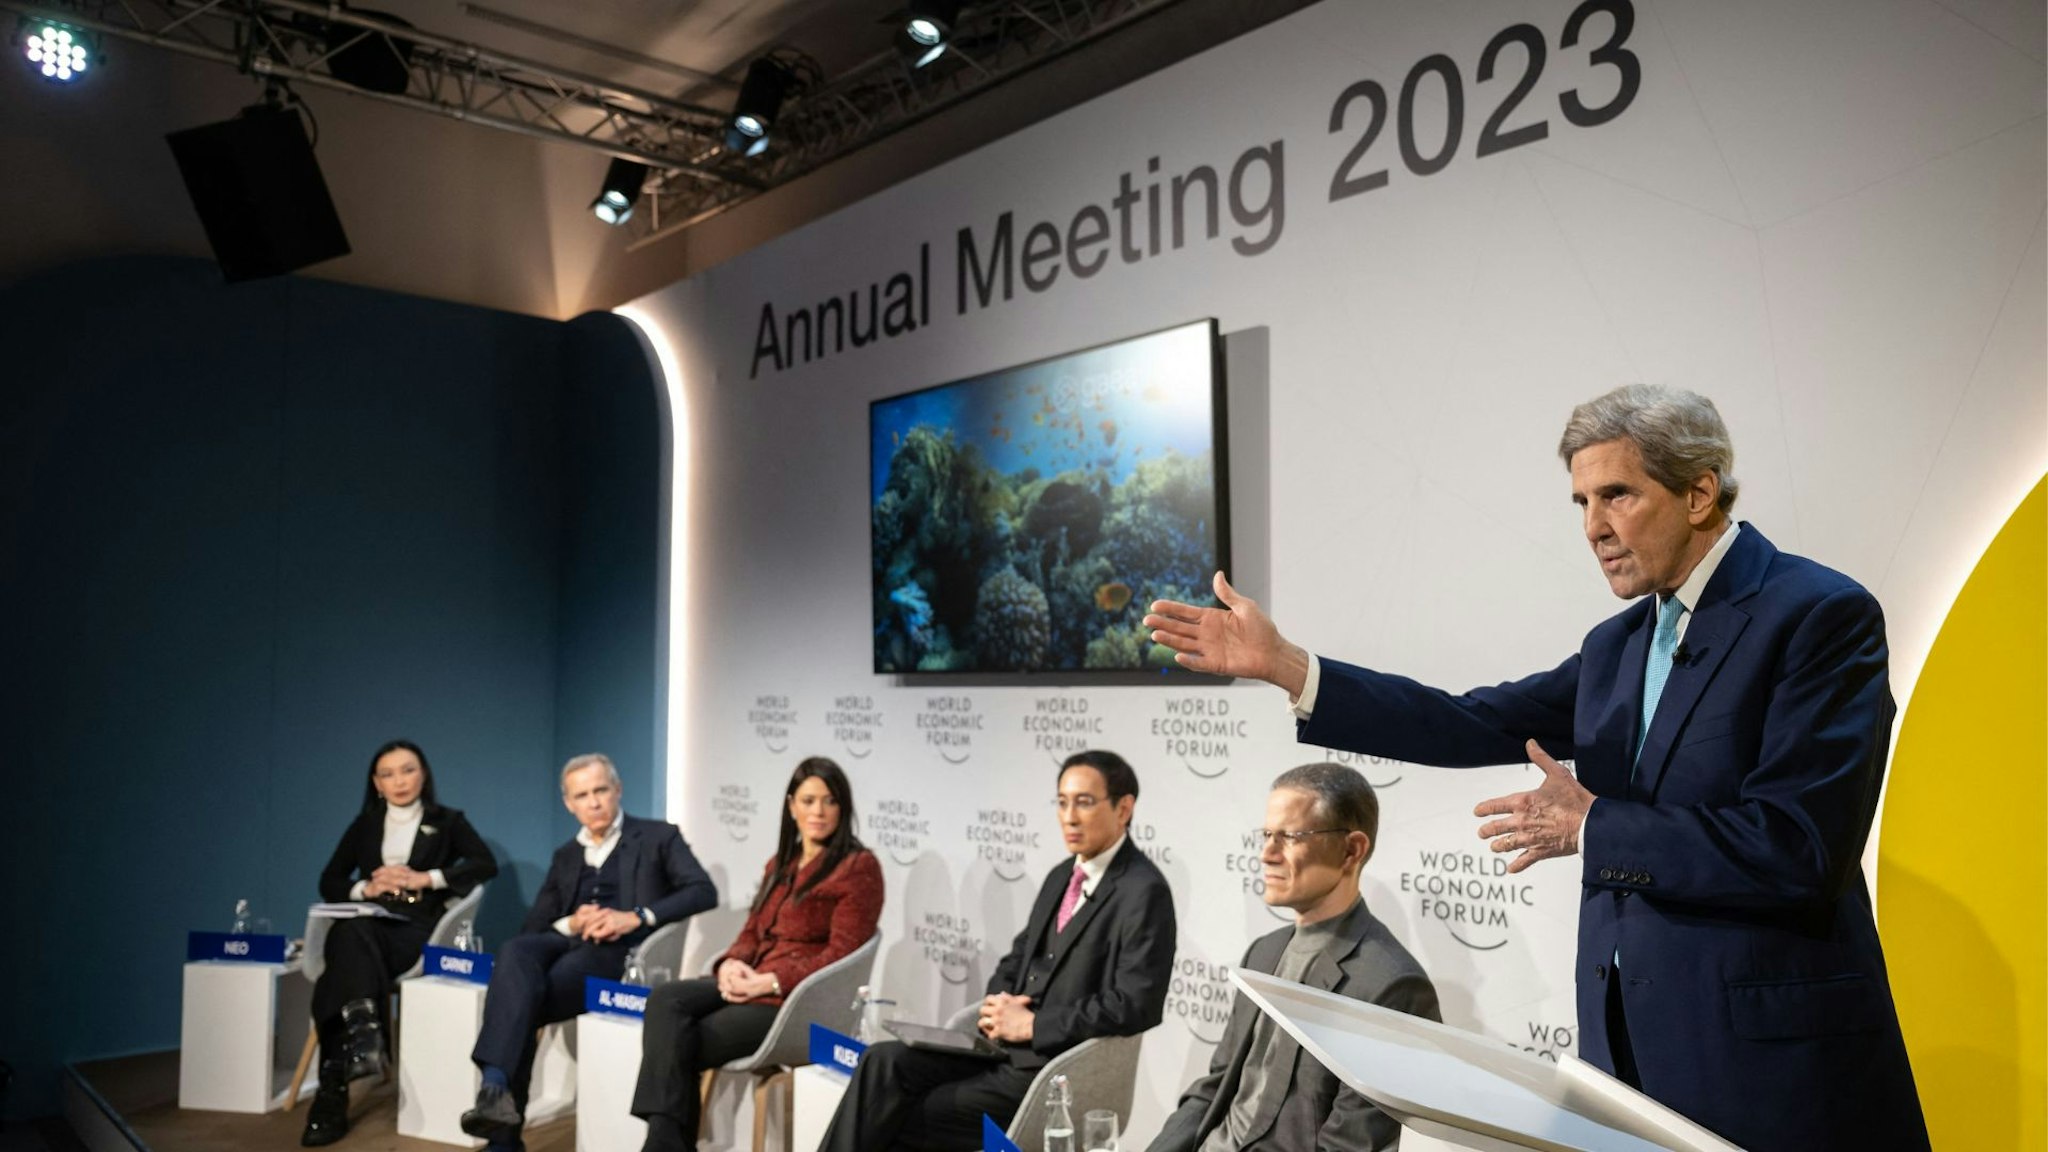 US Presidential Envoy for Climate John Kerry (R) delivers a speech at the Congress centre during the World Economic Forum (WEF) annual meeting in Davos on January 17, 2023.